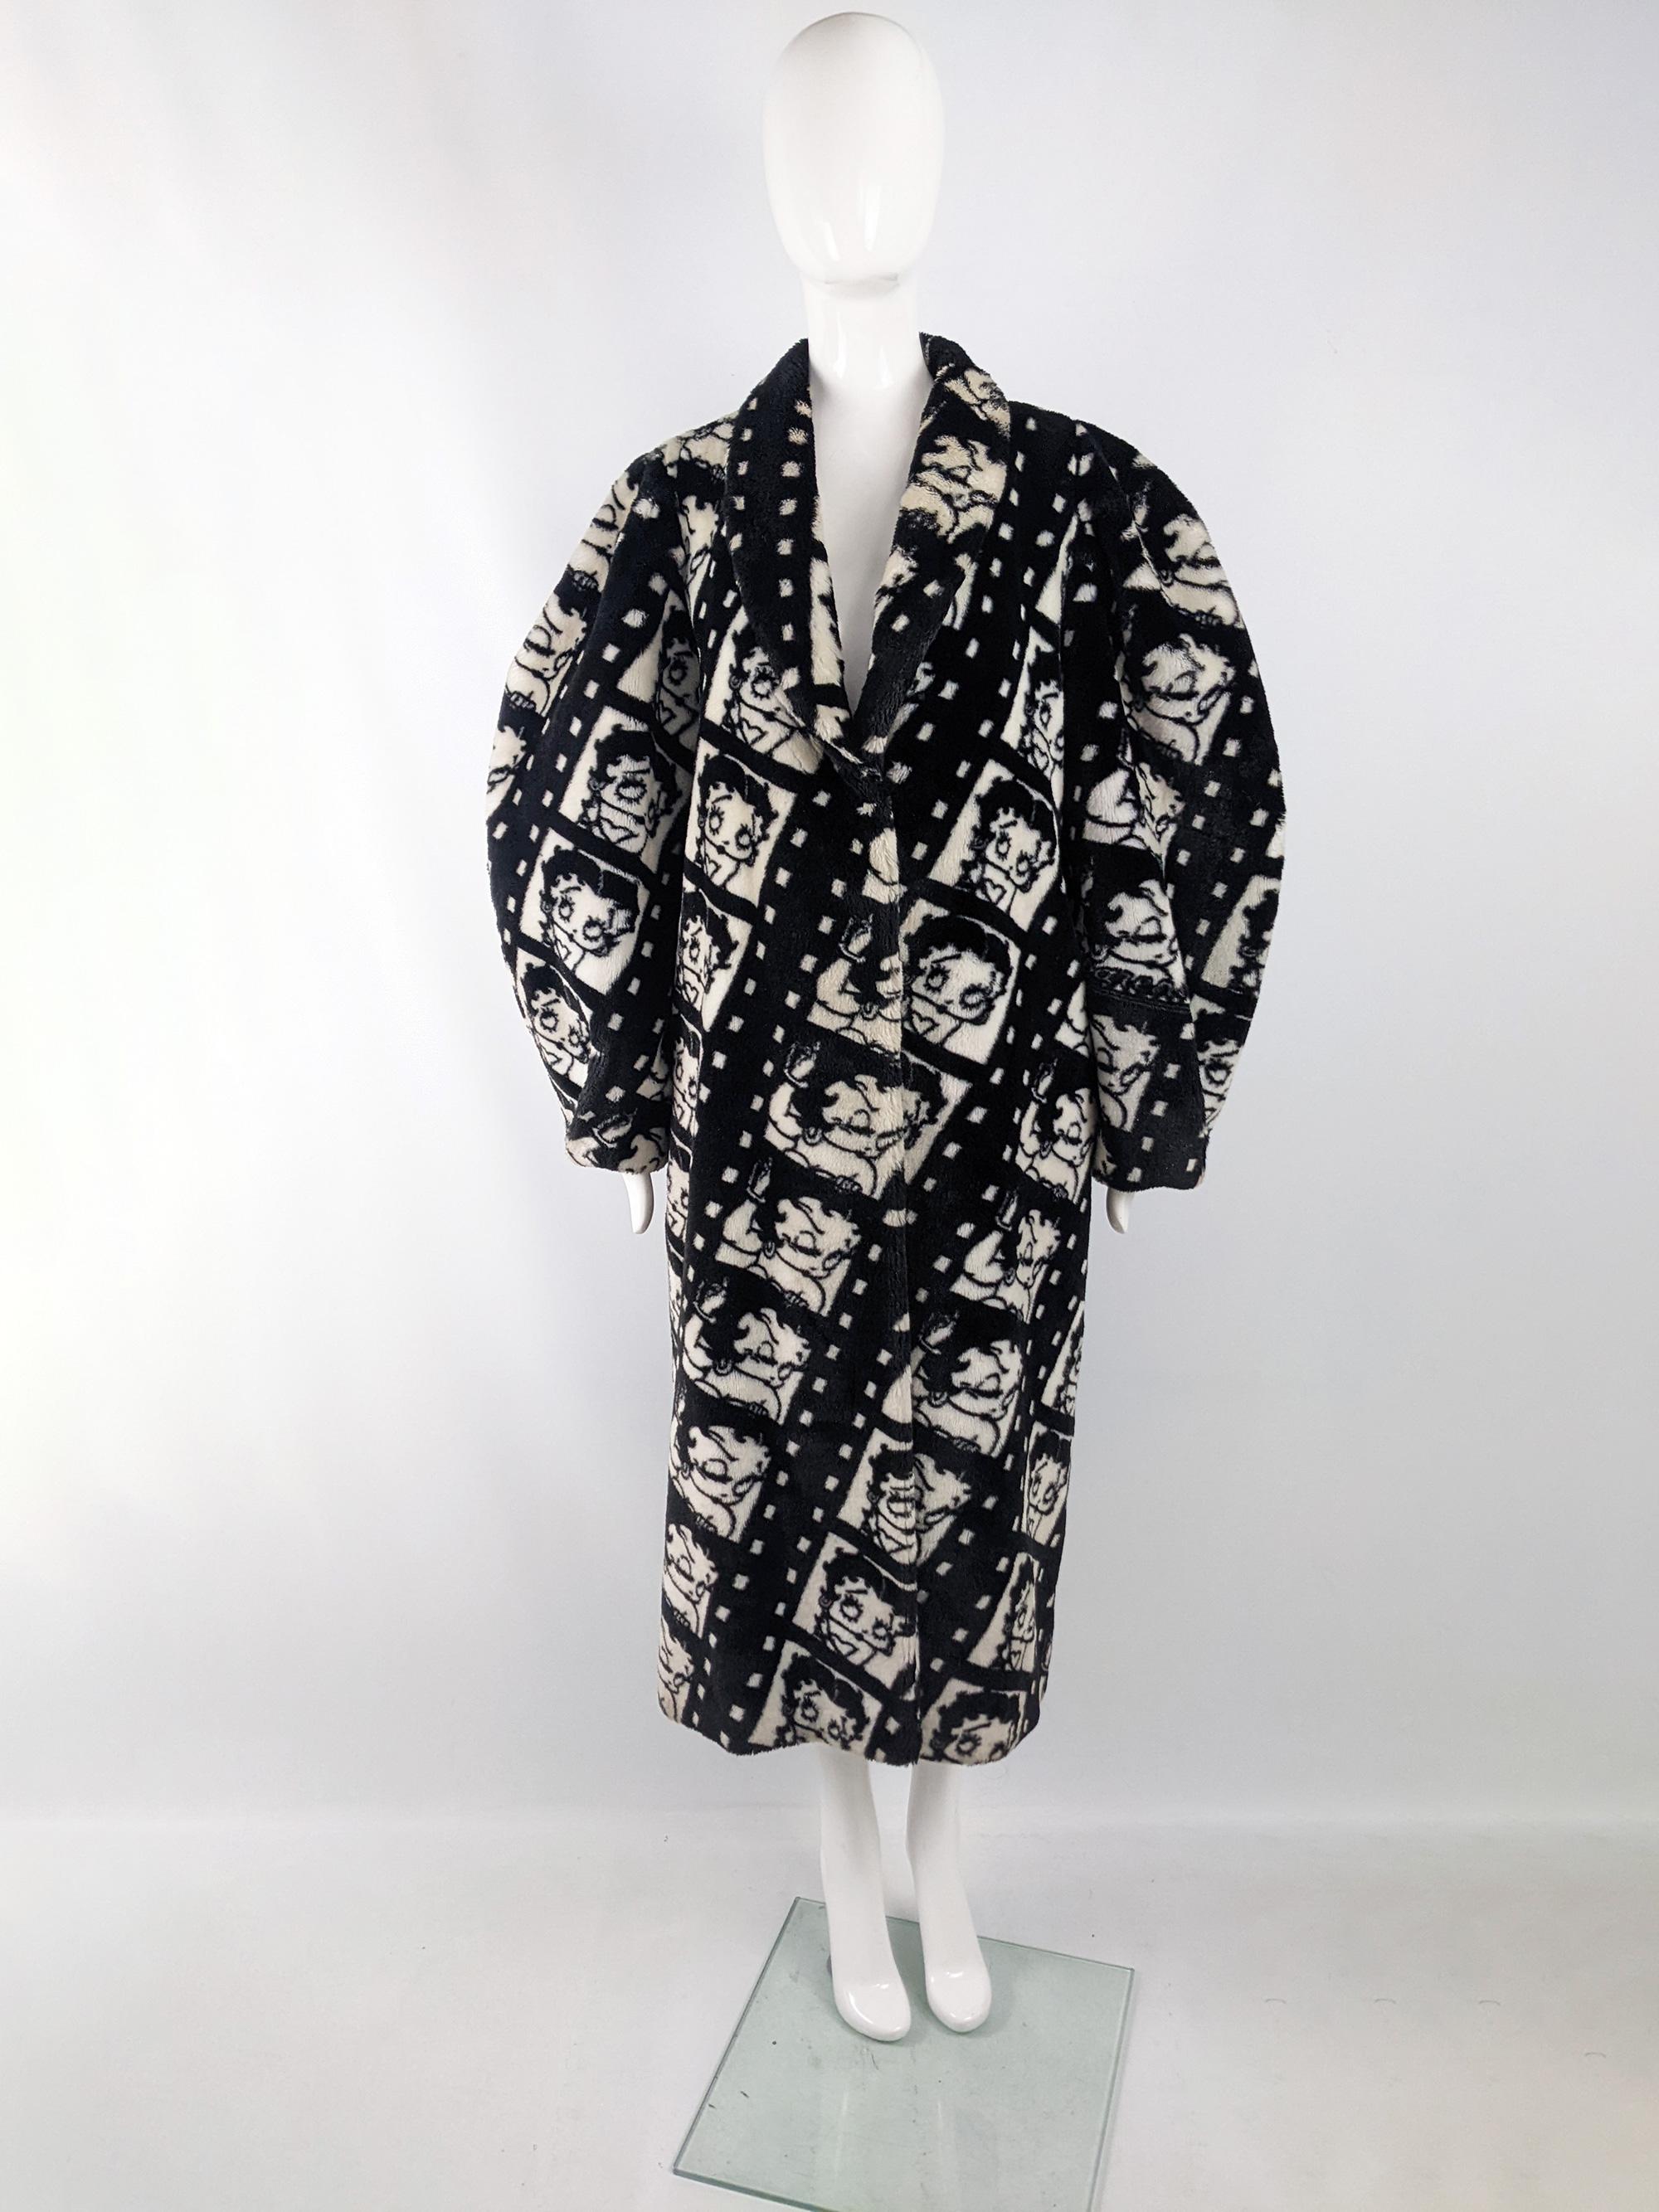 An absolutely incredible and rare vintage womens maxi coat from the 80s by luxury French fashion house, Apparence (best known for their Disney faux fur coats, but we've never seen another Betty Boop one). In a black and white faux fur with Betty